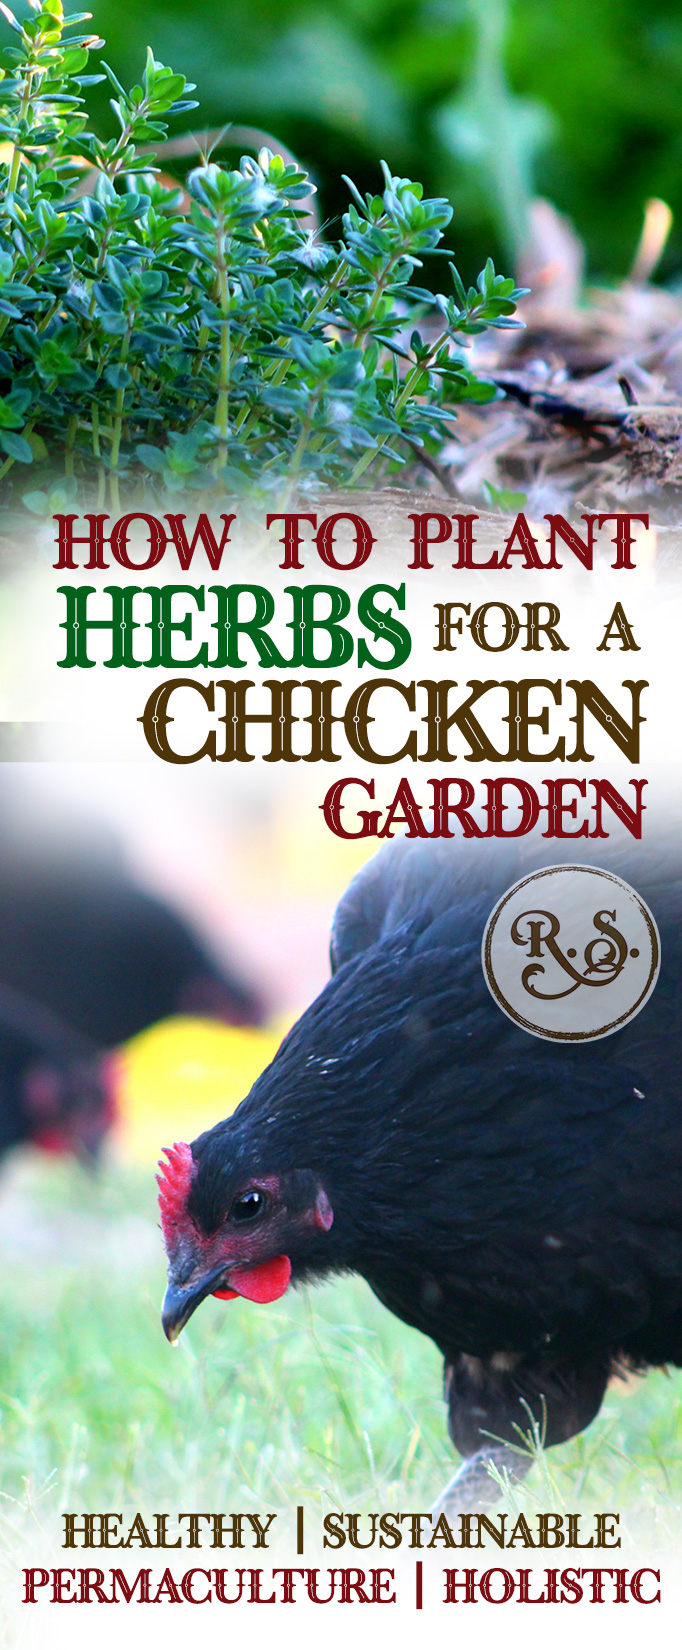 Grow herbs in your sustainable garden for your backyard chickens to save money. Natural health for your chickens—permaculture style. Great DIY herbal health ideas for your hens.